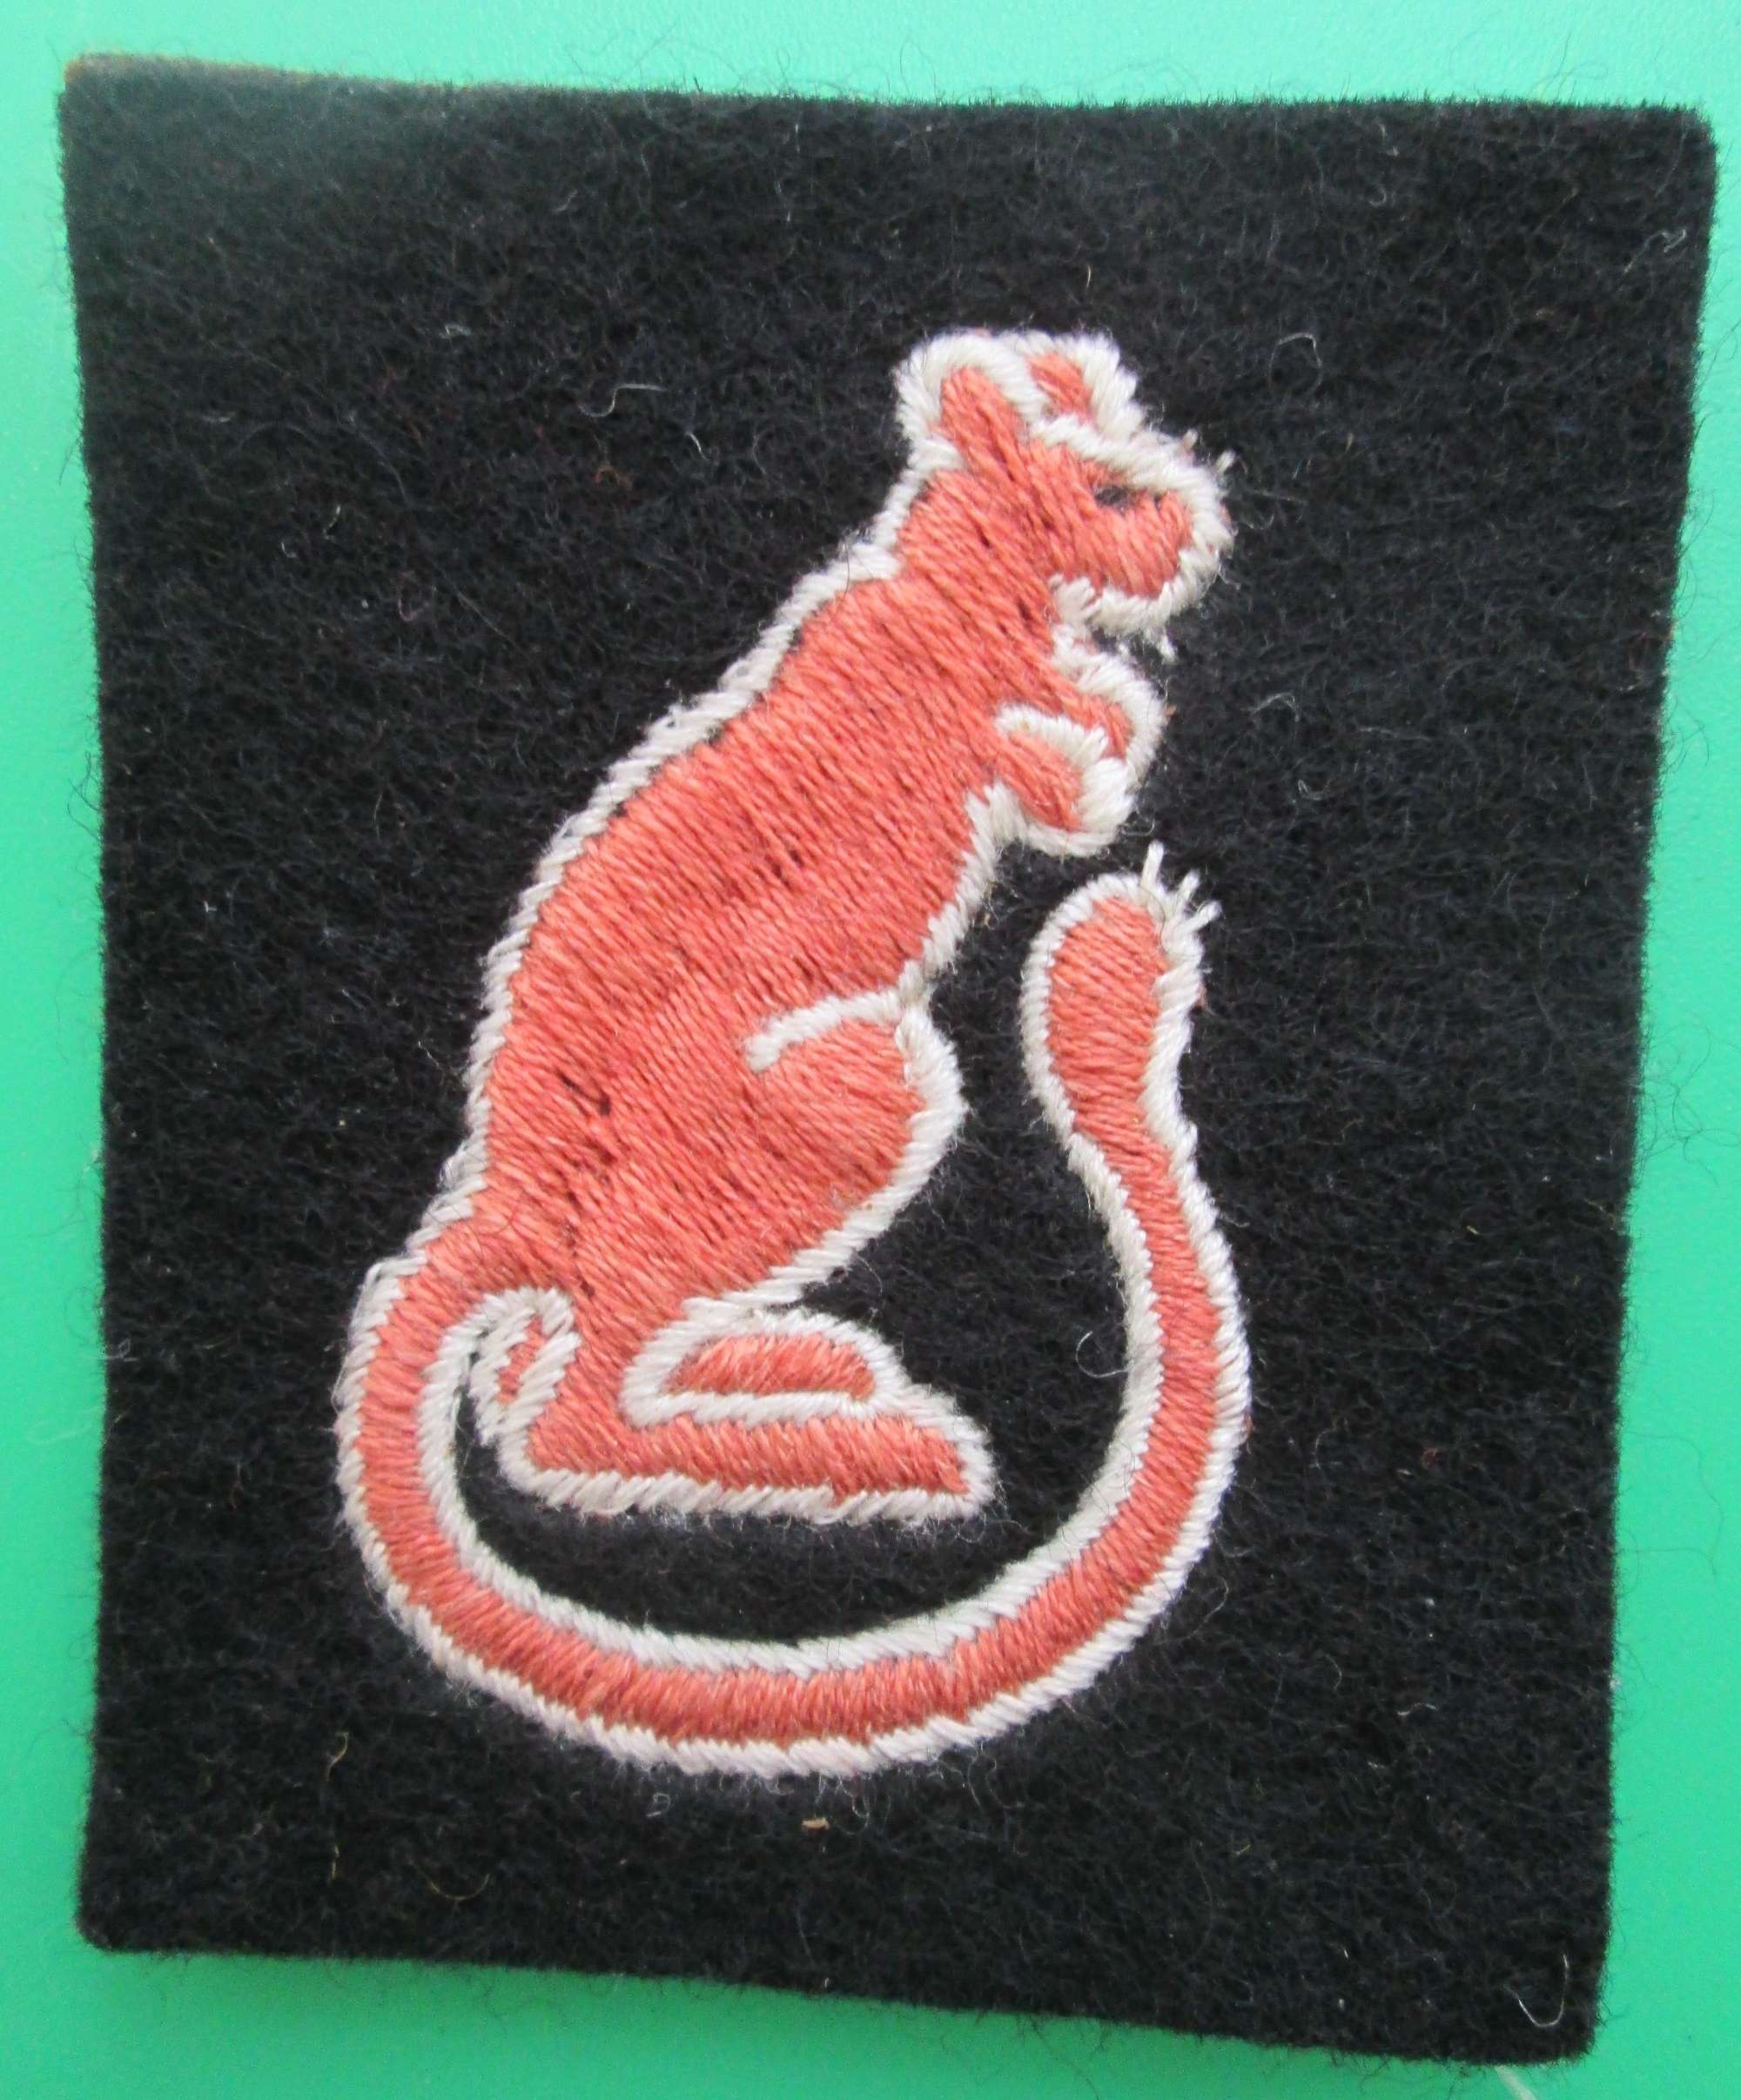 A 7TH ARMOURED DIVISION FORMATION SIGN